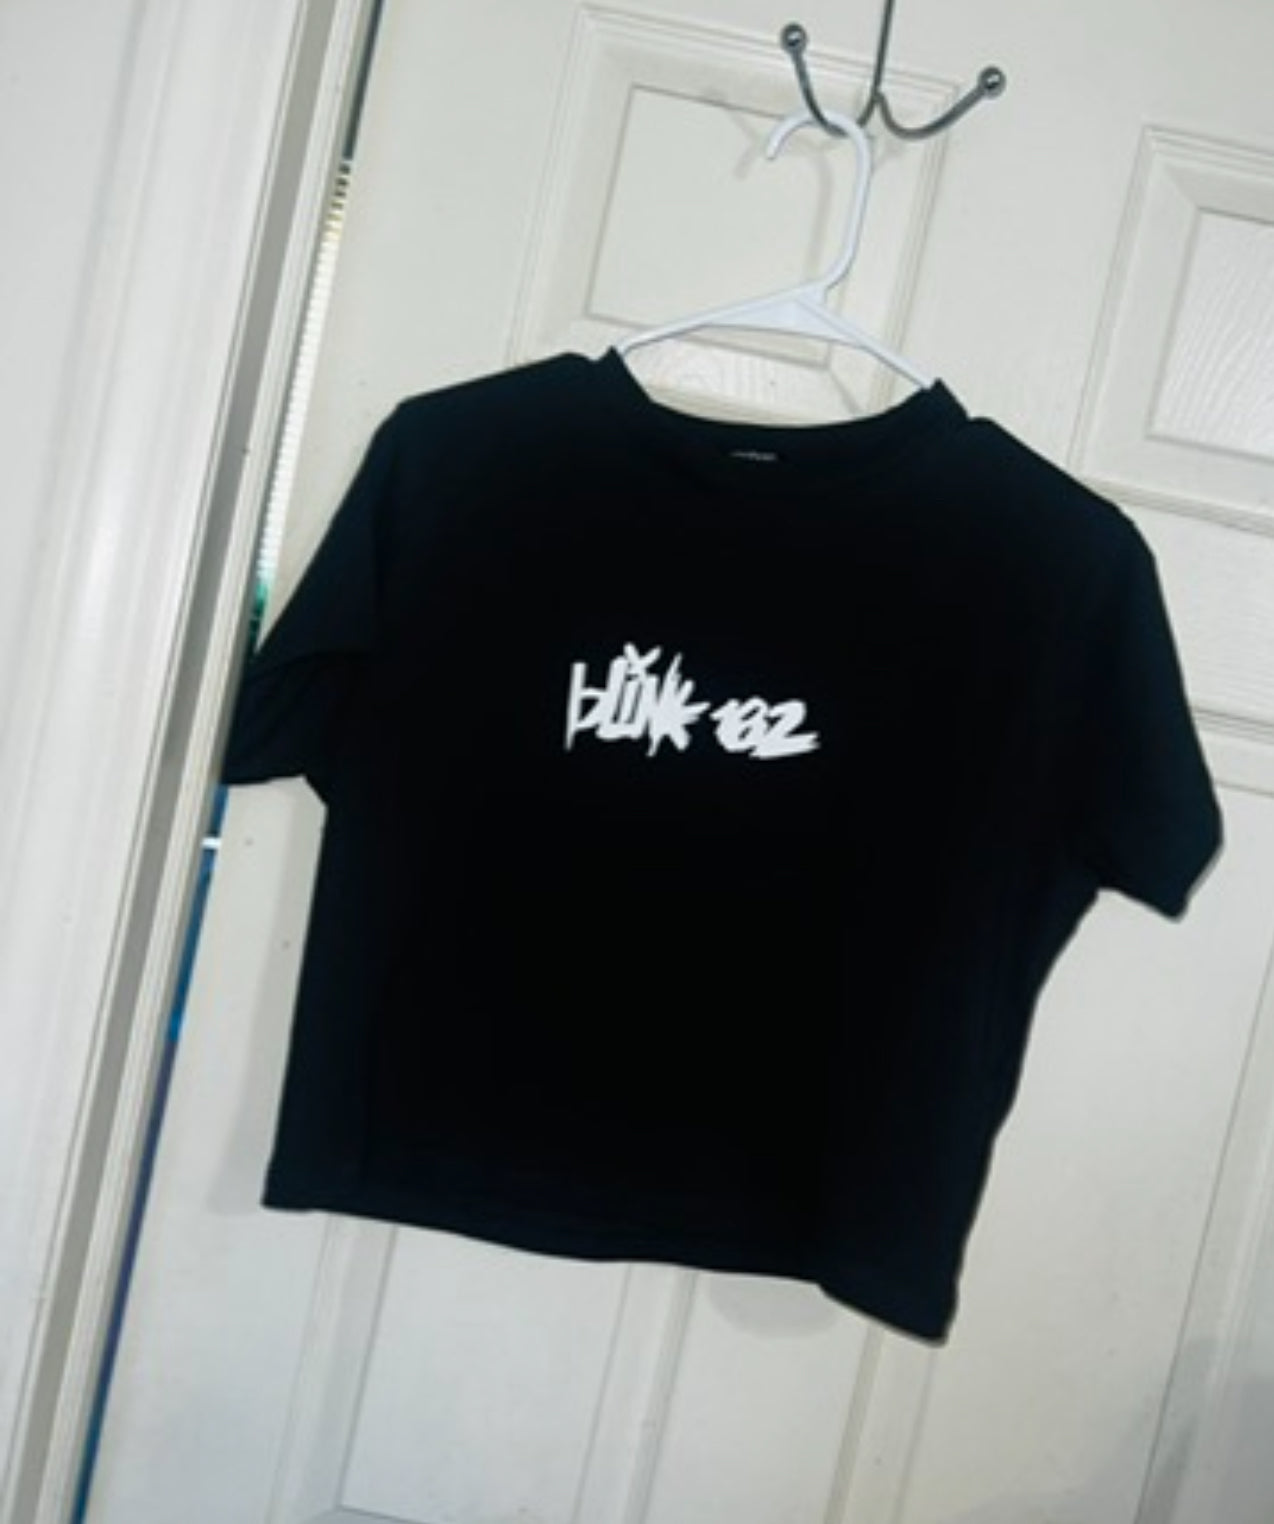 Blink 182 Baby Tees (black and white)